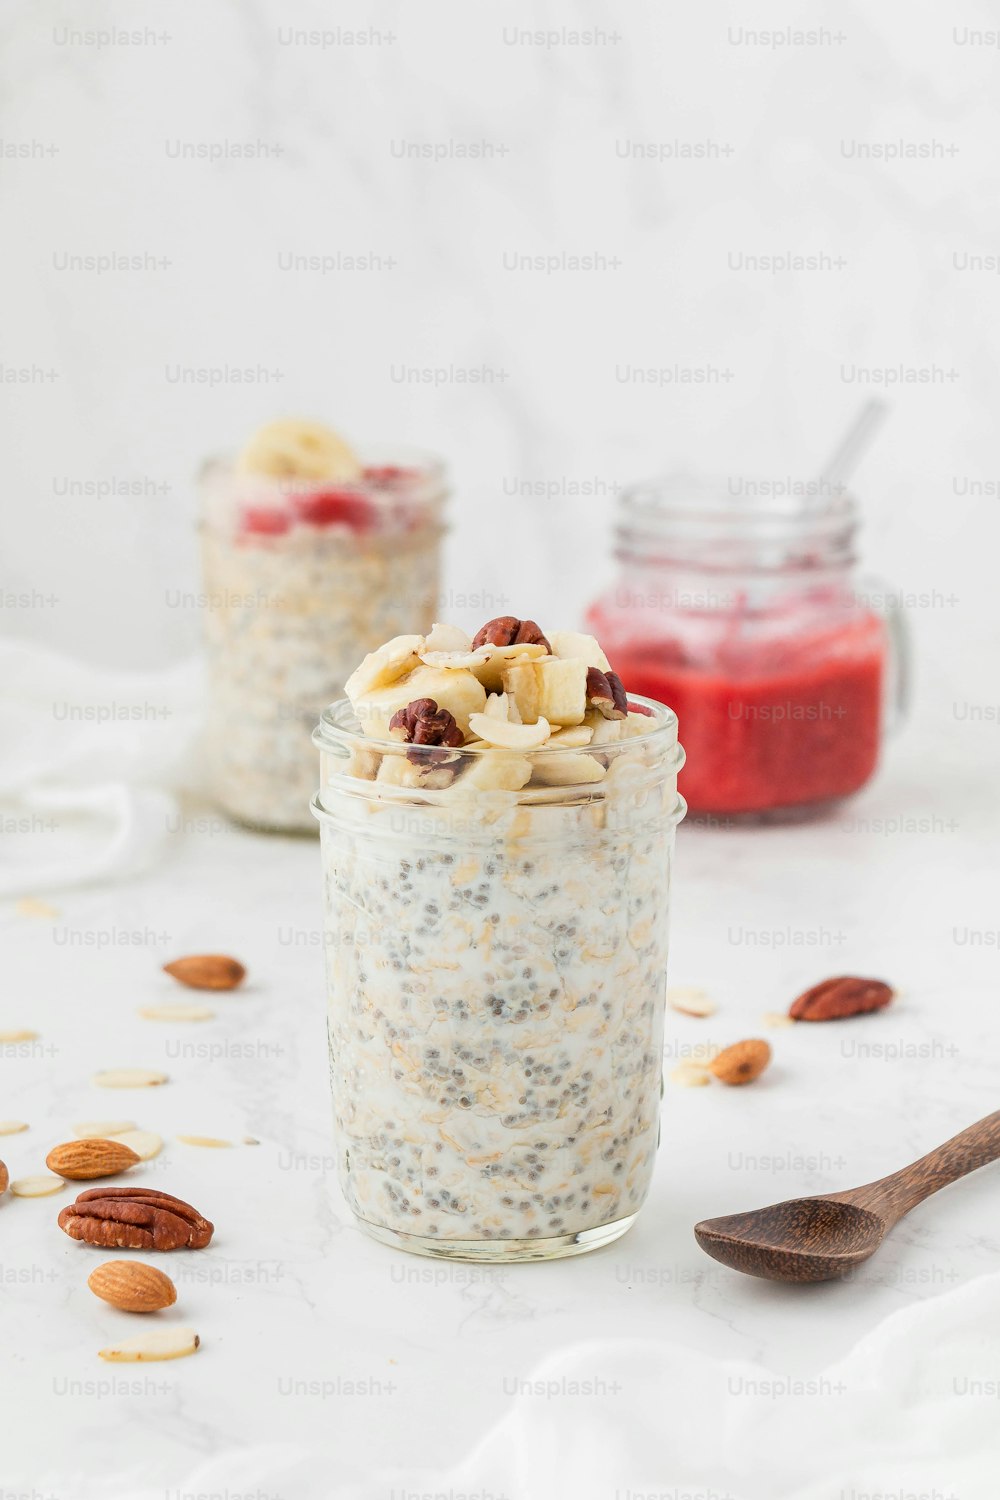 a jar filled with oatmeal and nuts next to a spoon